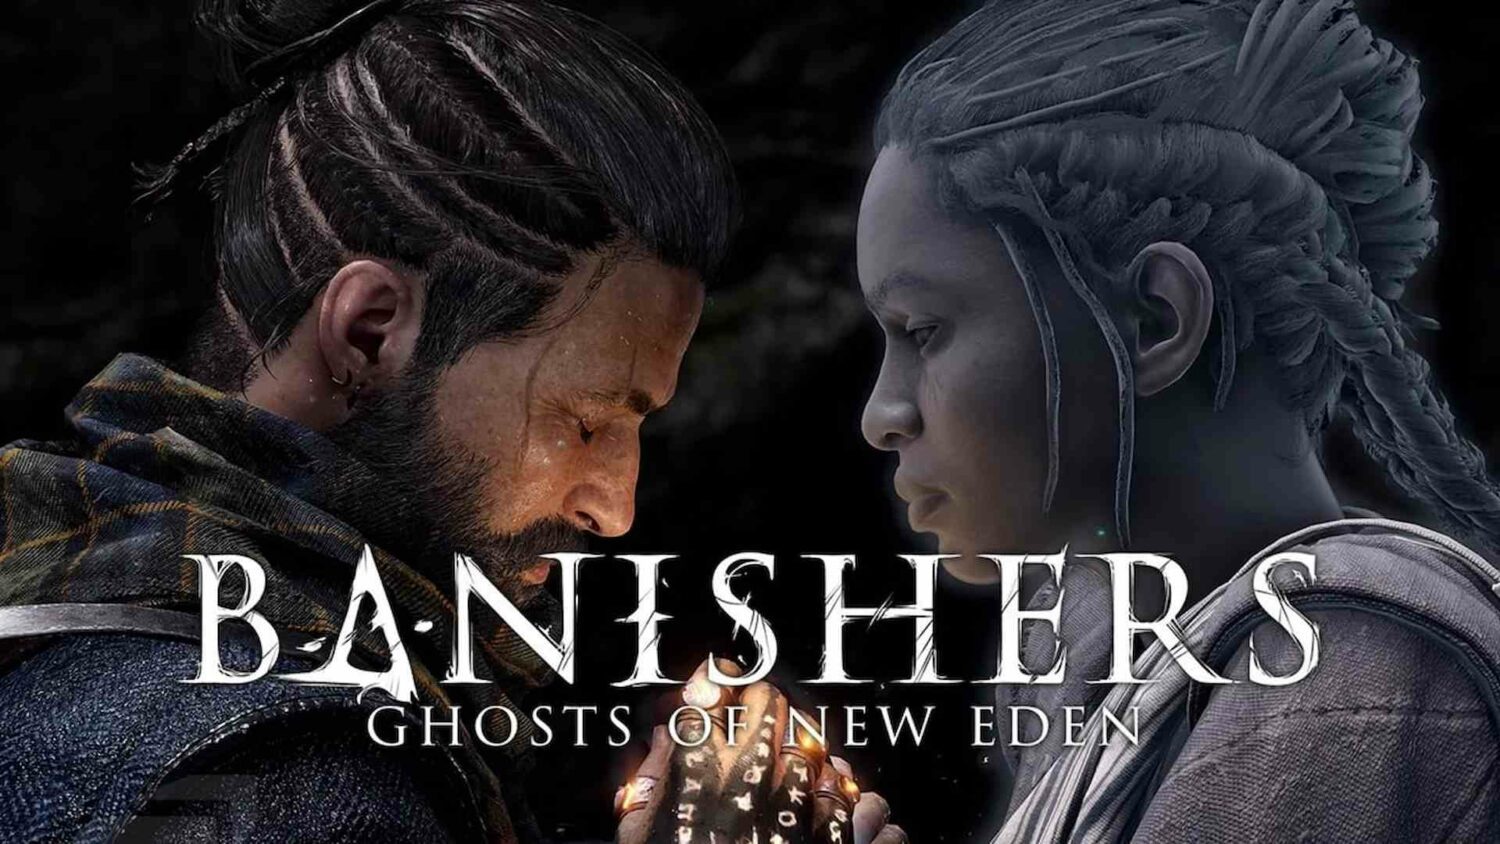 Banishers-Ghosts-of-New-Eden-feature-1-scaled.jpg